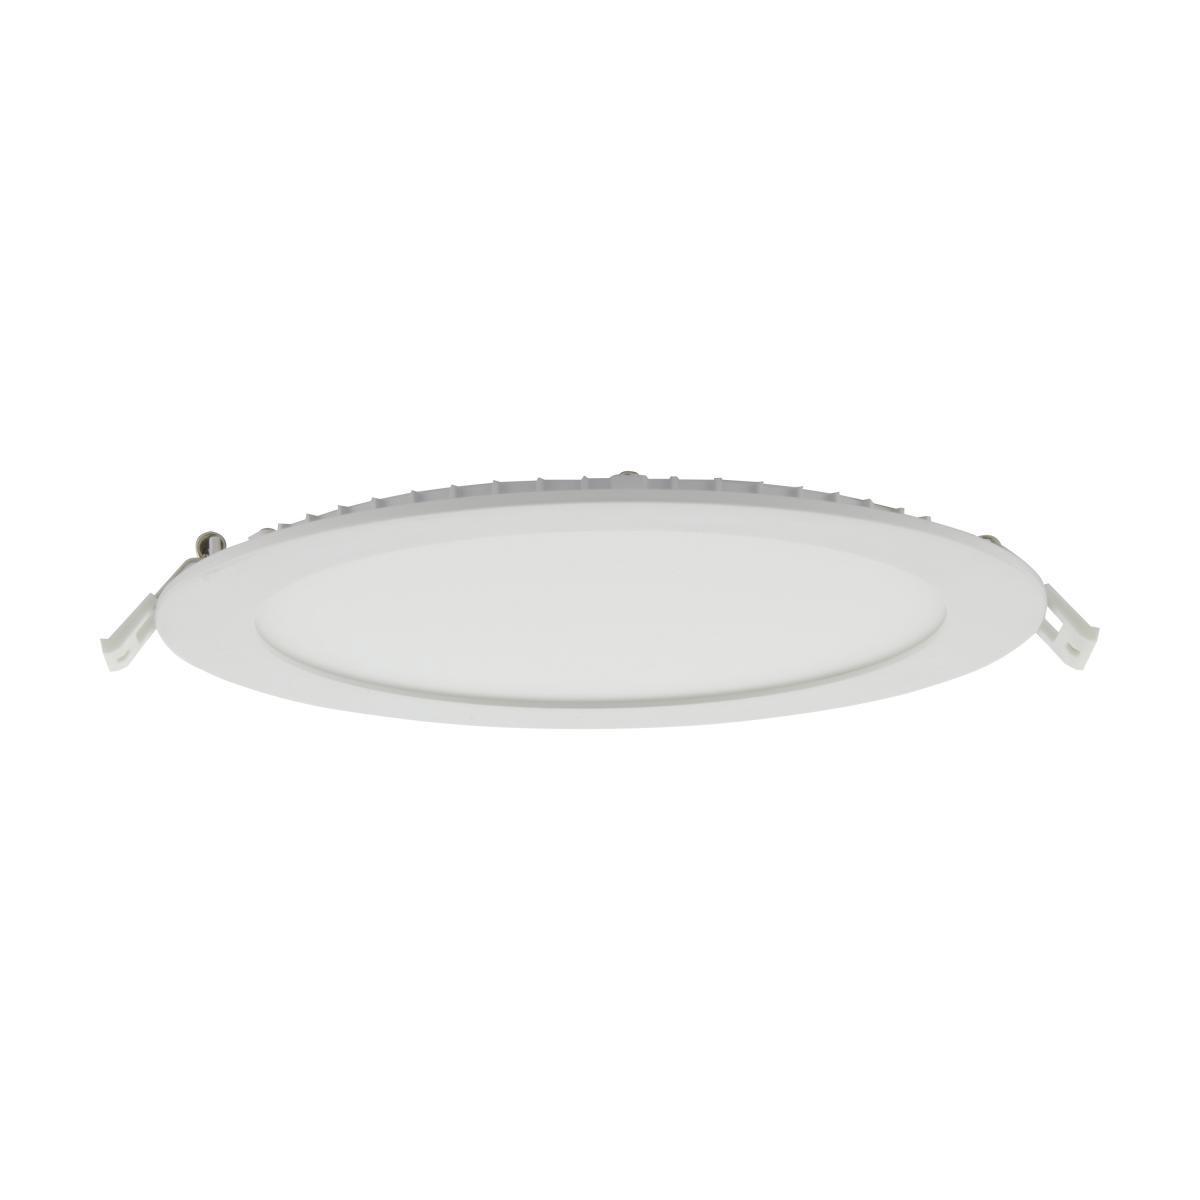 8 Inch Ultra Slim Canless LED Recessed Light, Round, 24 Watt, 1850 Lumens, Selectable CCT, 2700K to 5000K, Remote Driver